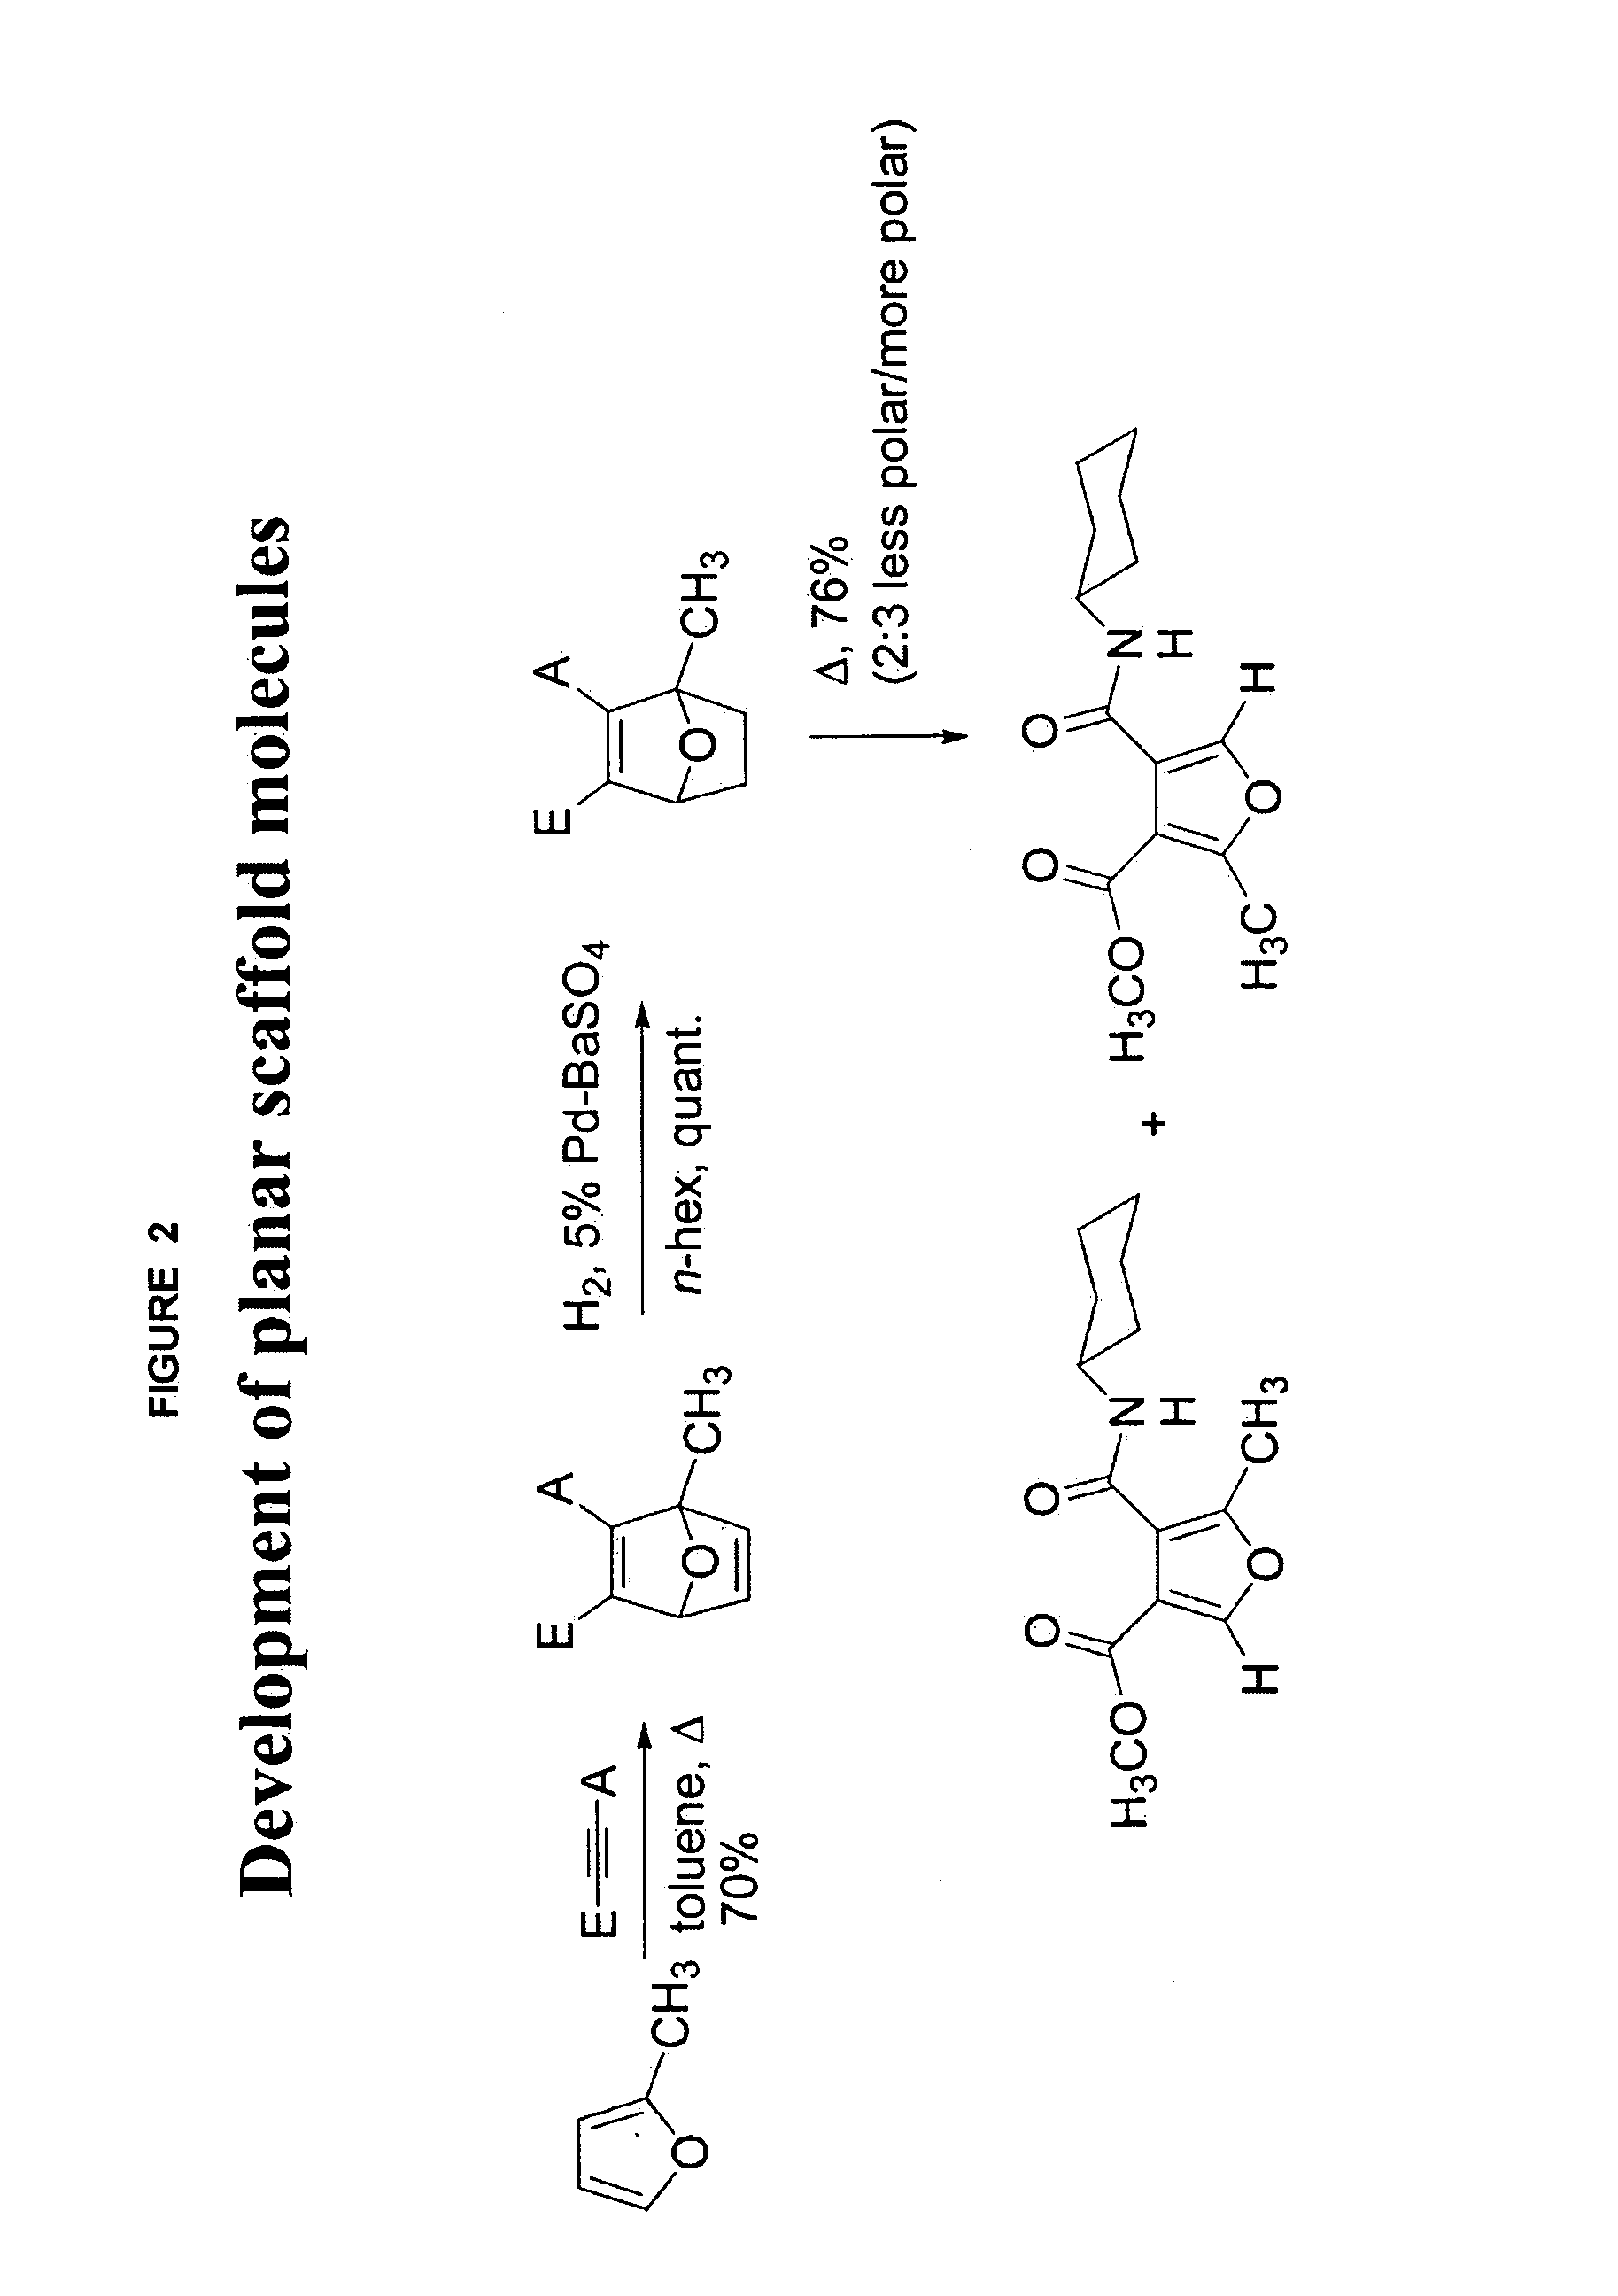 Compounds and methods for treating tumors, cancer and hyperproliferative diseases